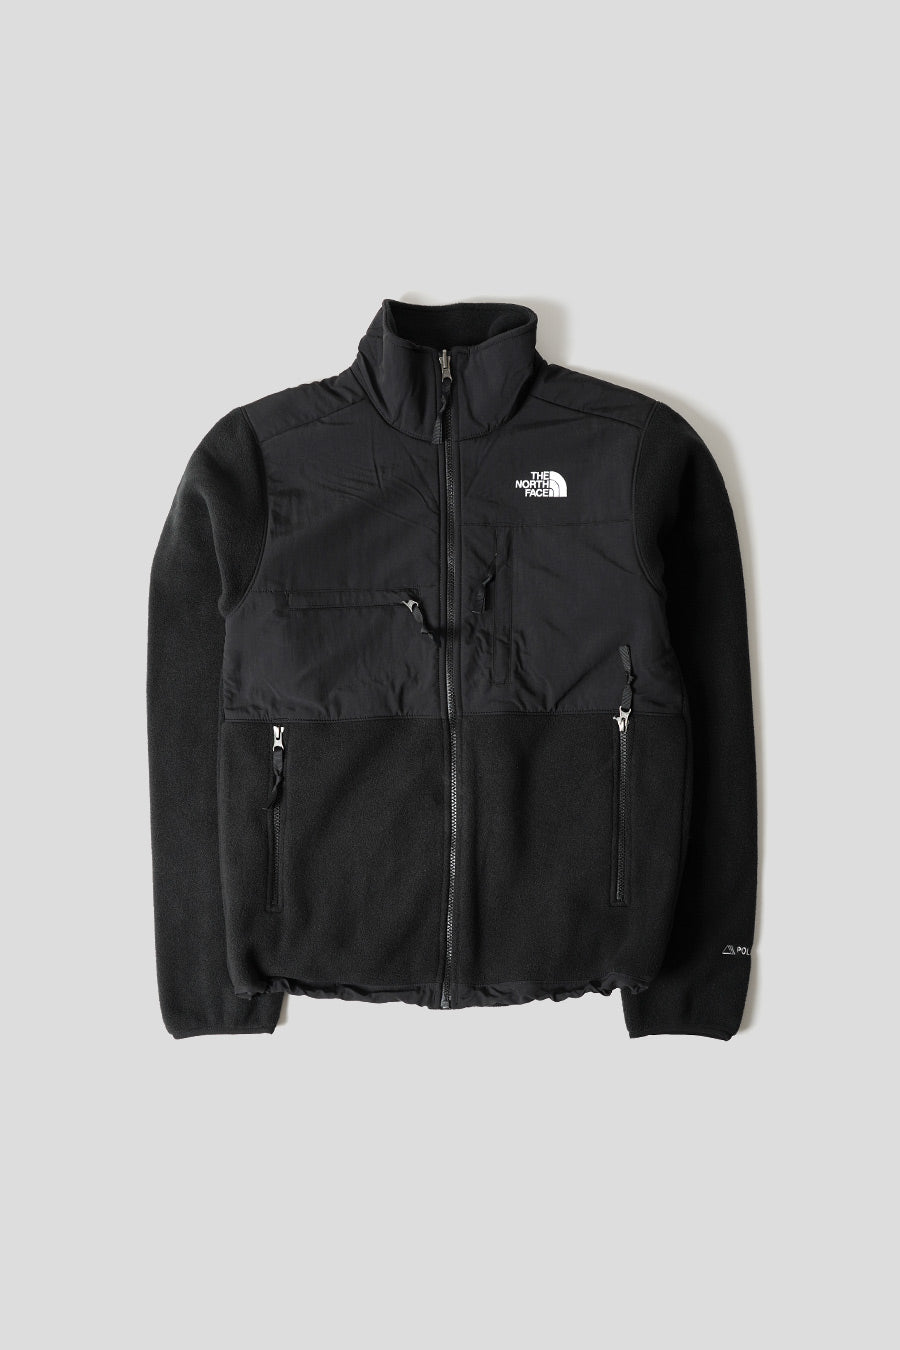 The North Face - BLACK MOUNTAIN GORE-TEX JACKET - LE LABO STORE